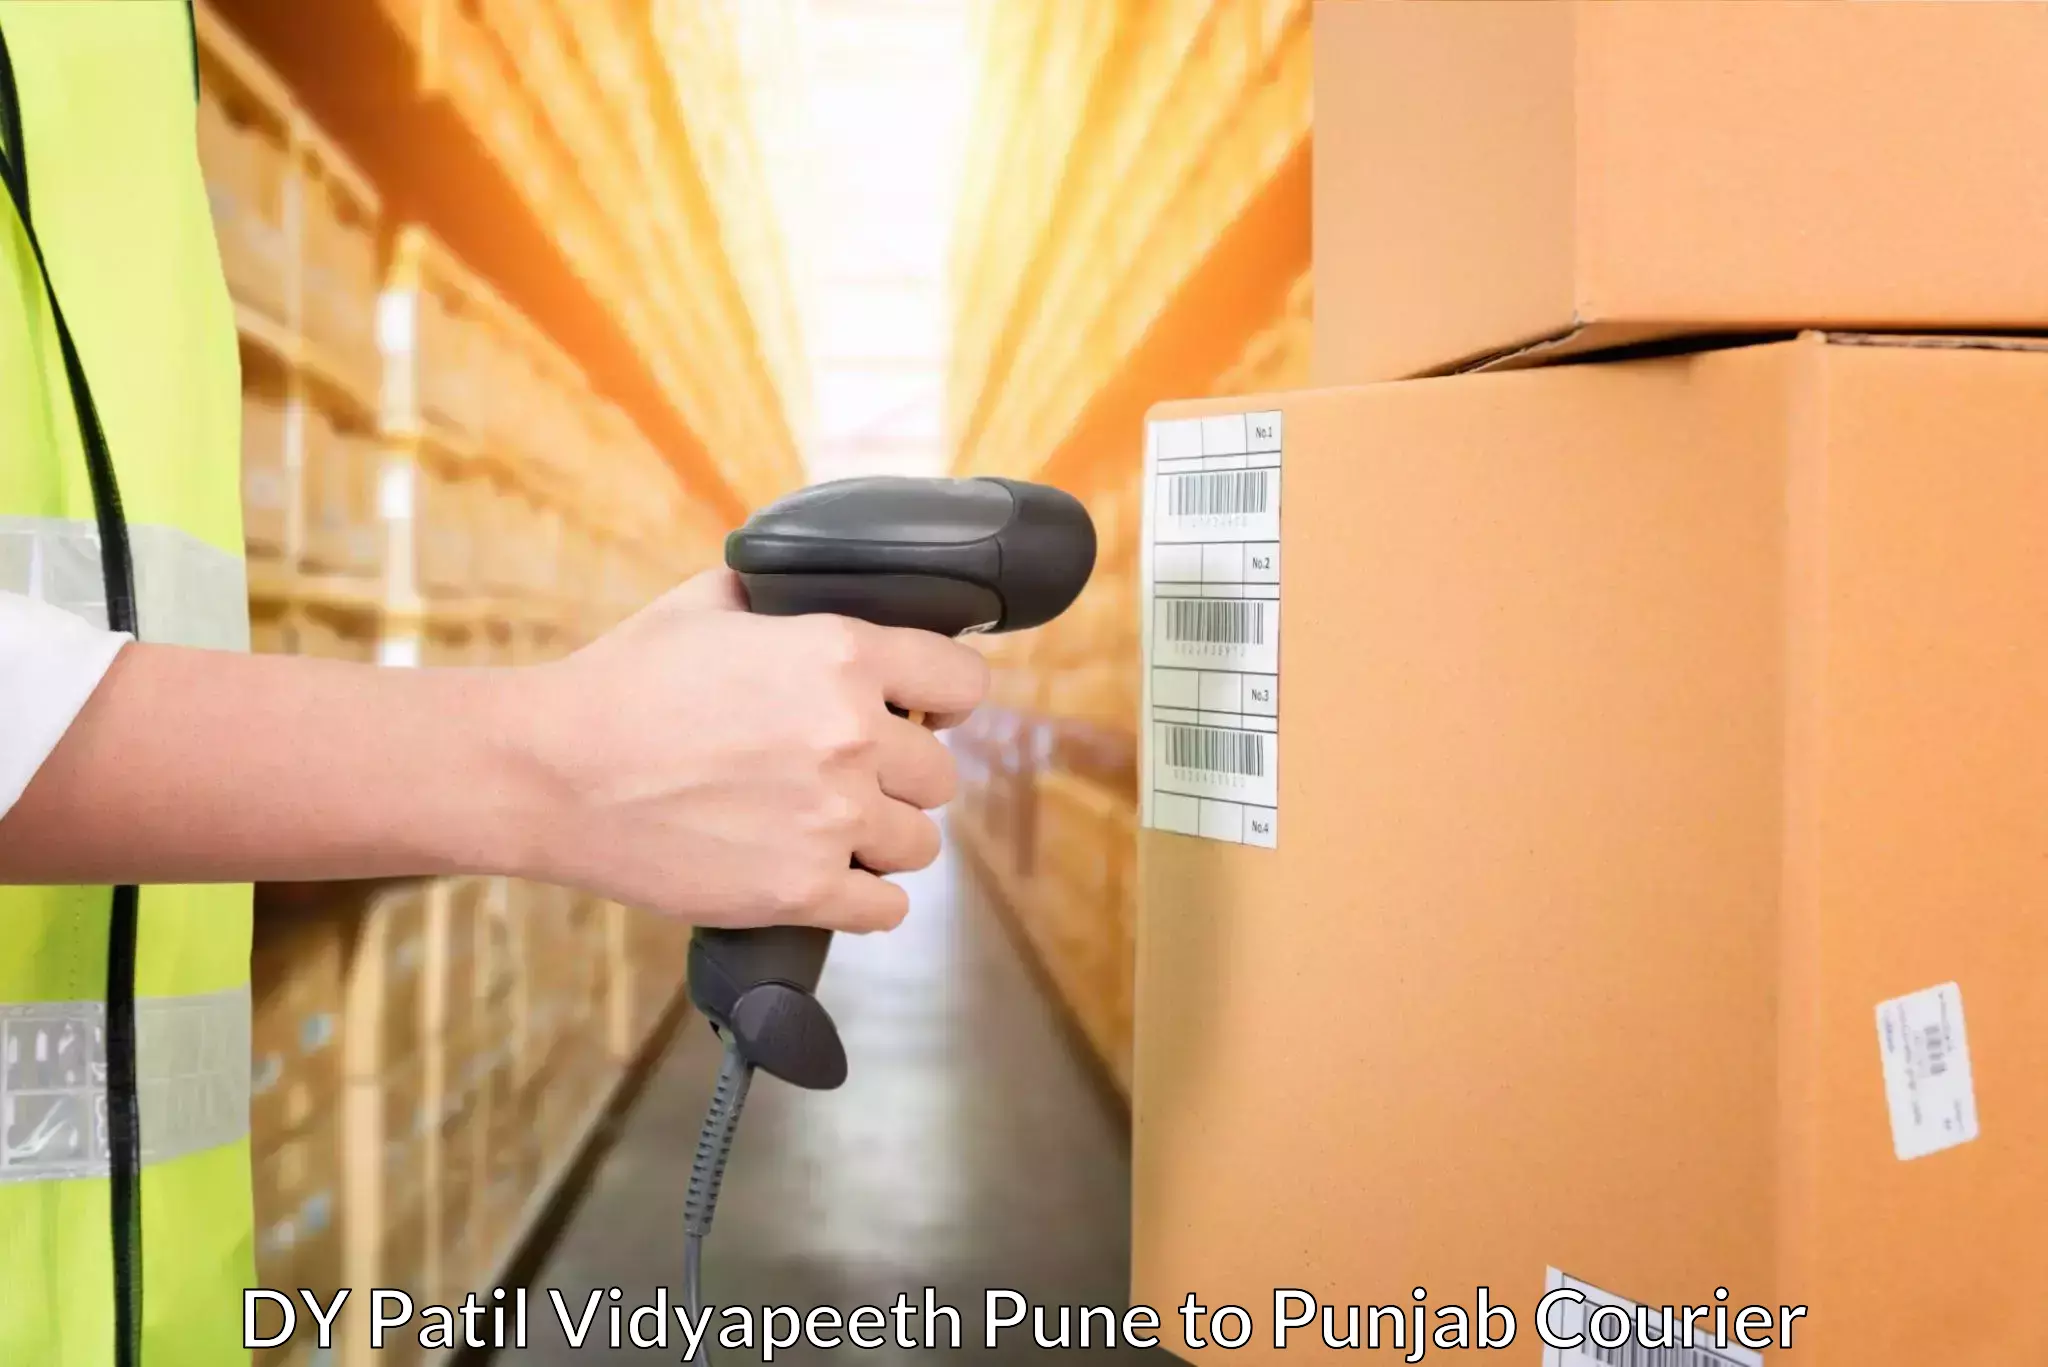 24/7 shipping services DY Patil Vidyapeeth Pune to Bathinda